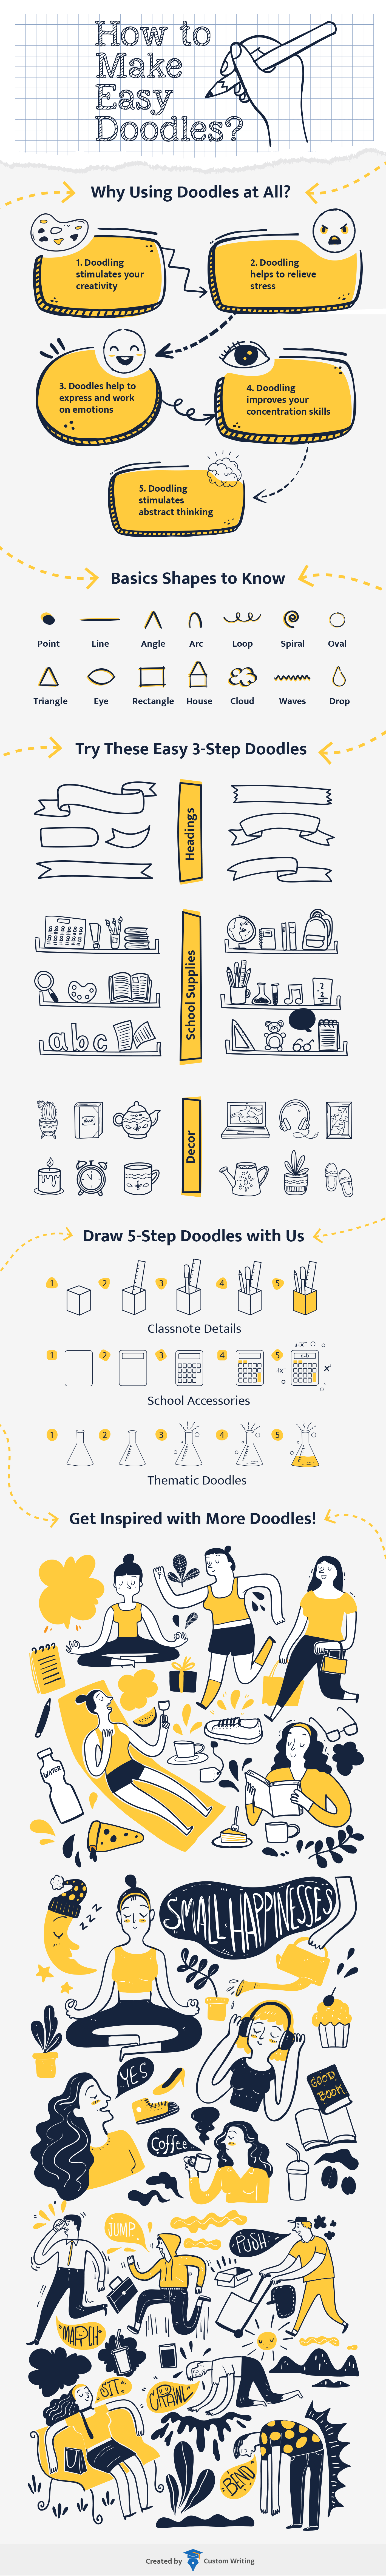 doodle infographic